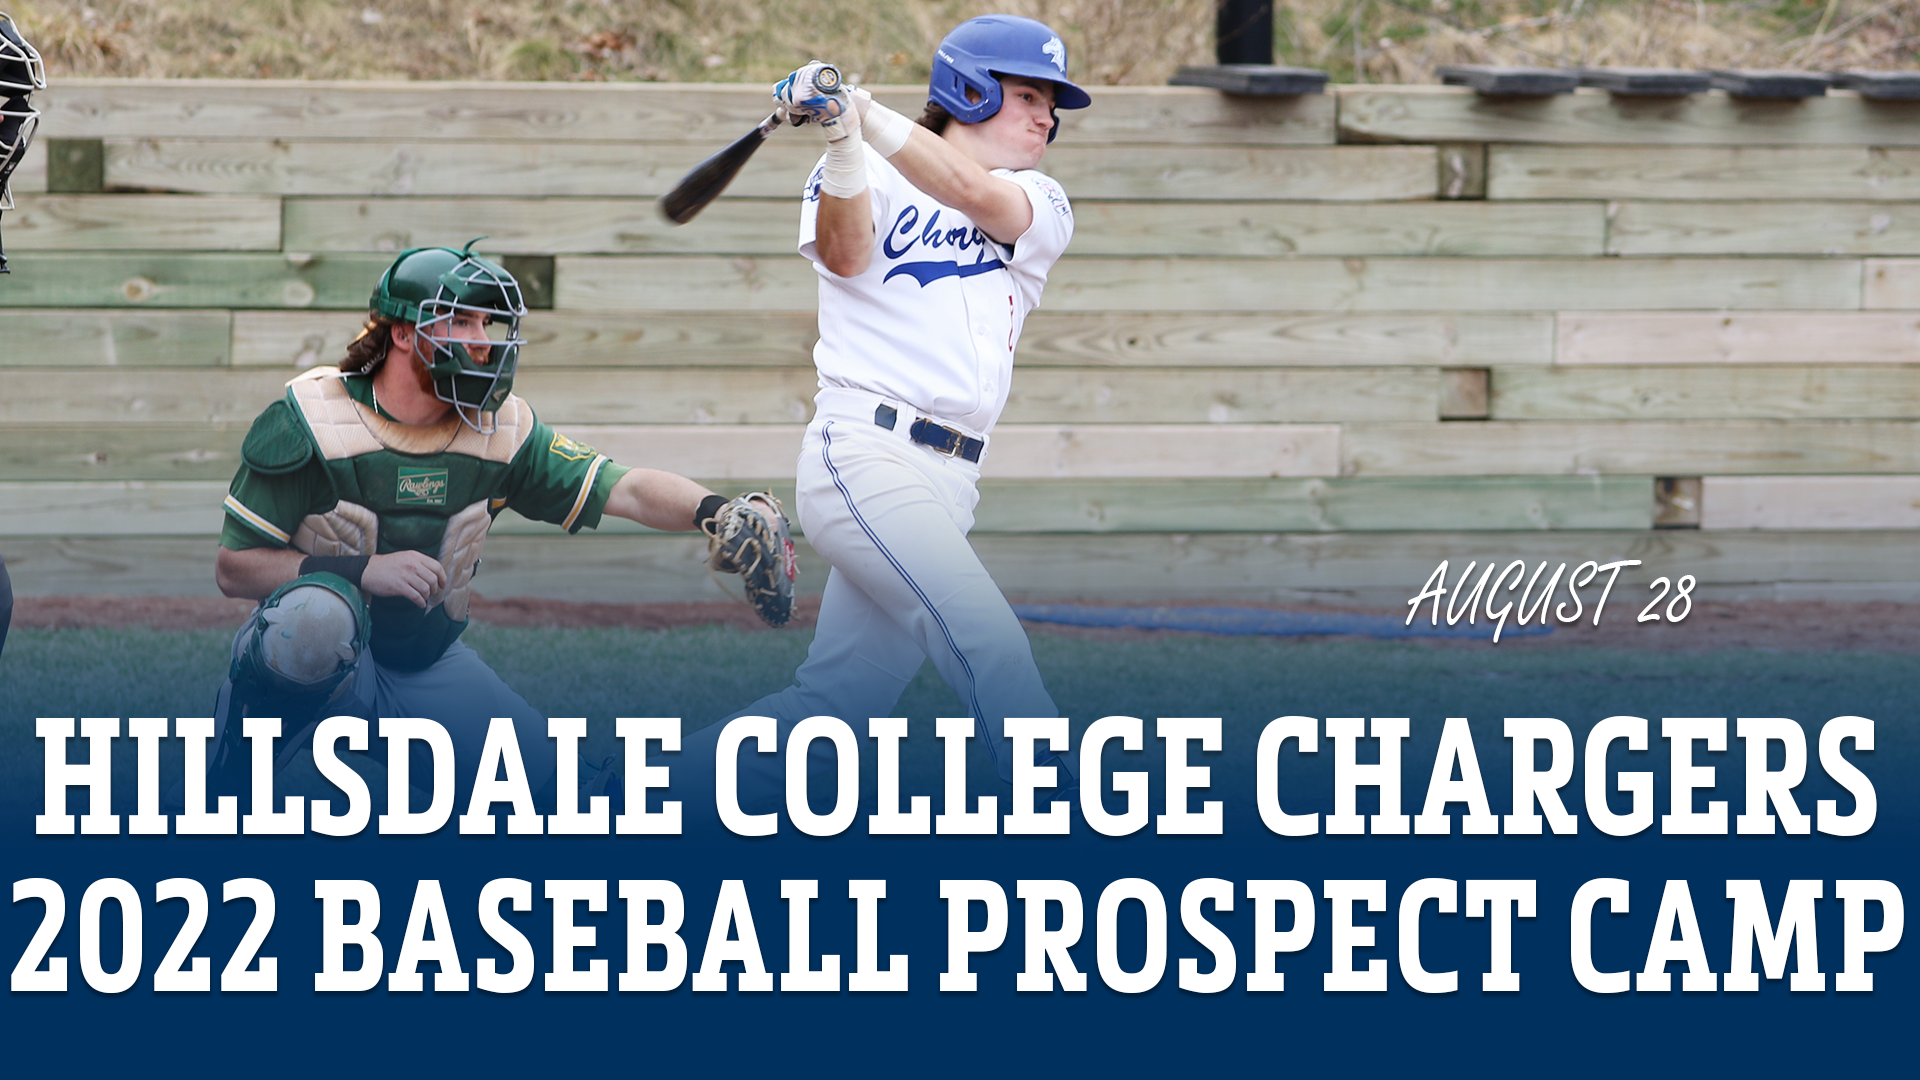 Chargers baseball team to host Prospect Camp on Aug. 28